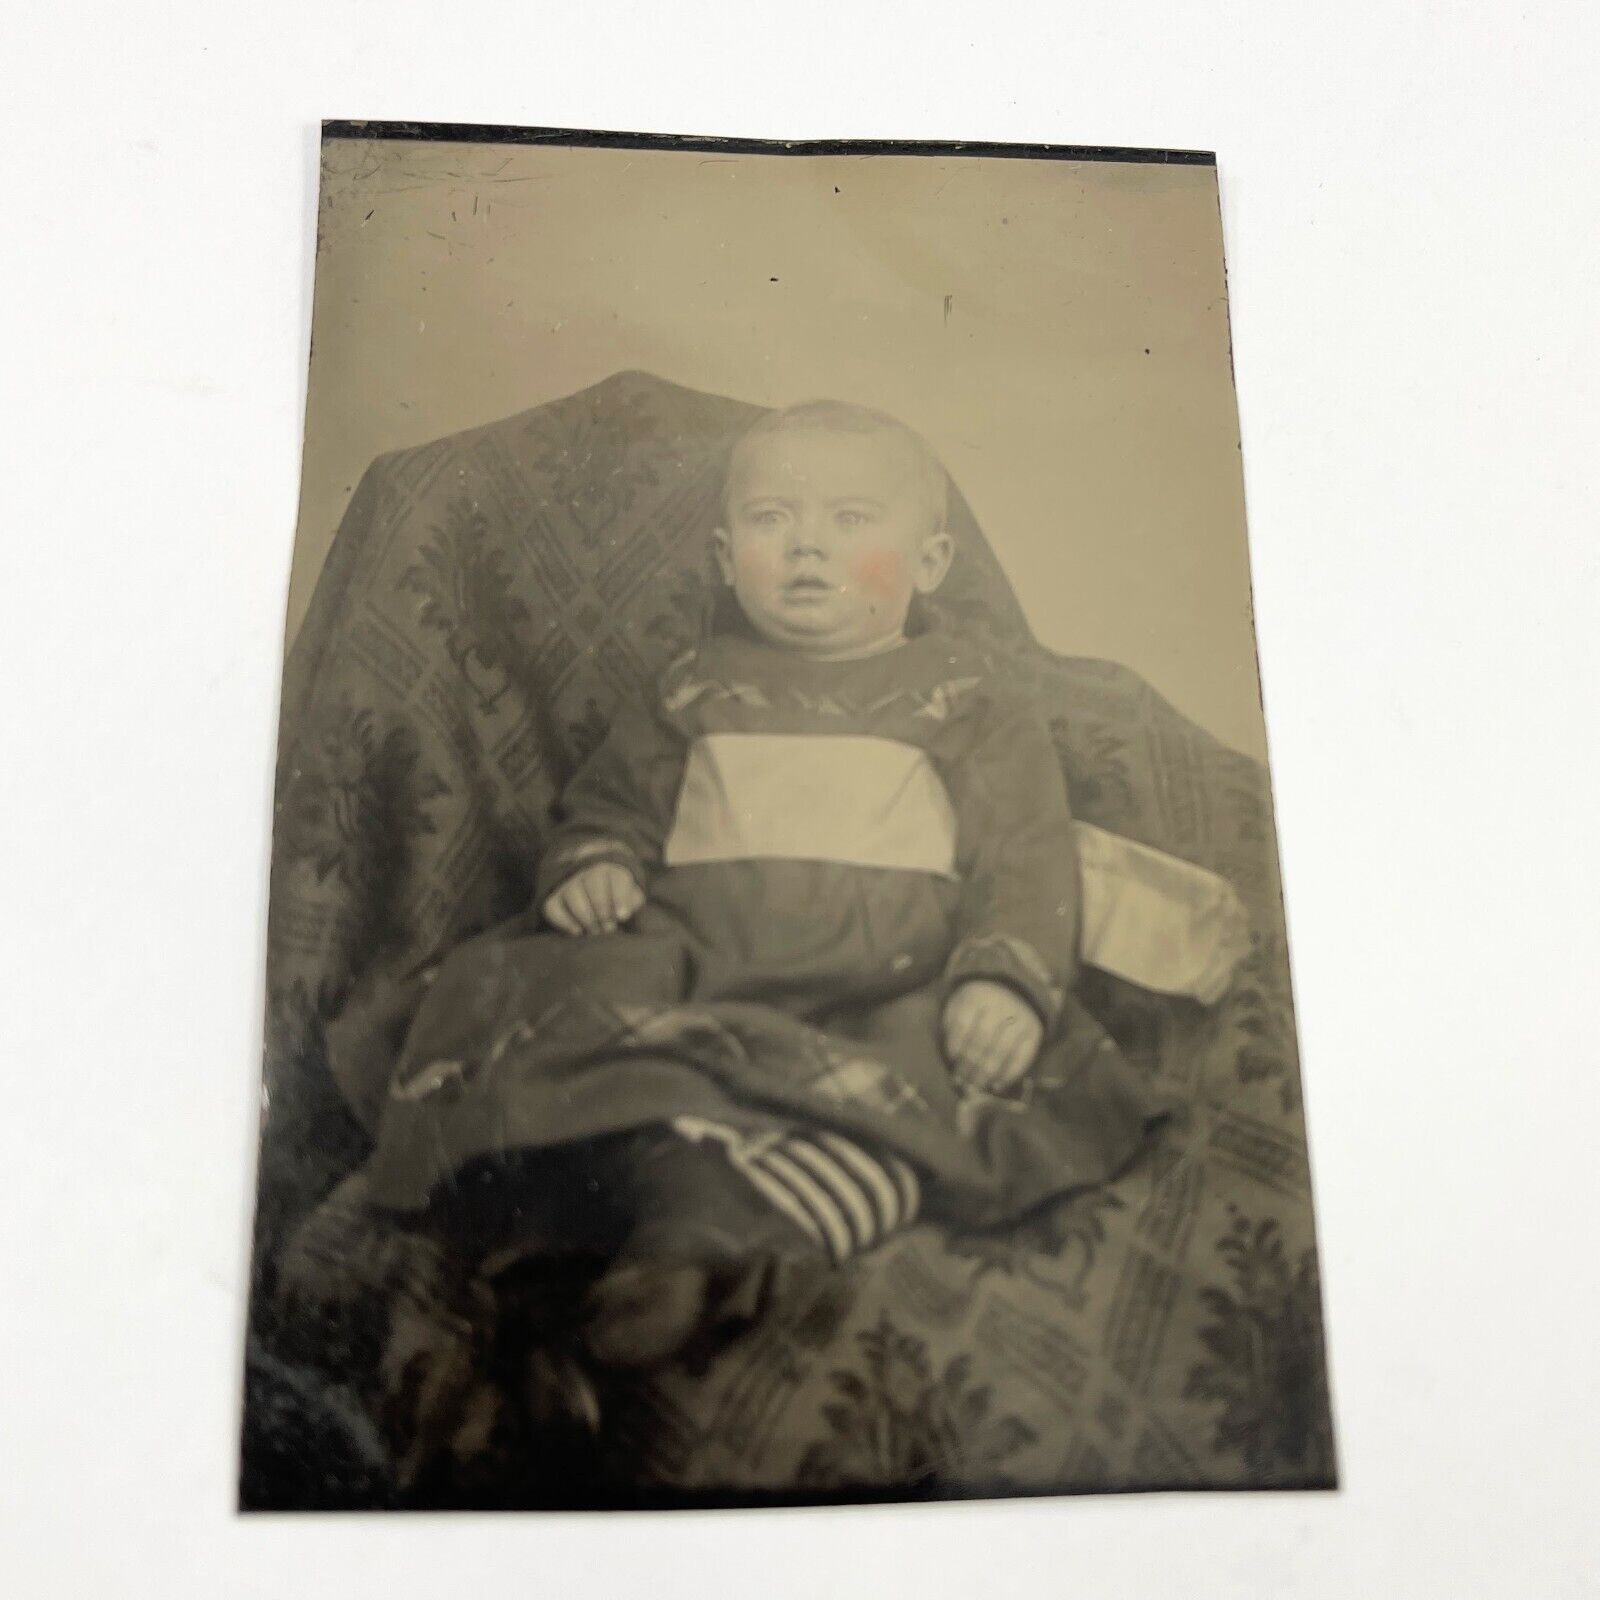 HIDDEN MOTHER BABY TODDLER TINTYPE Antique Covered Cloaked Creepy Spooky